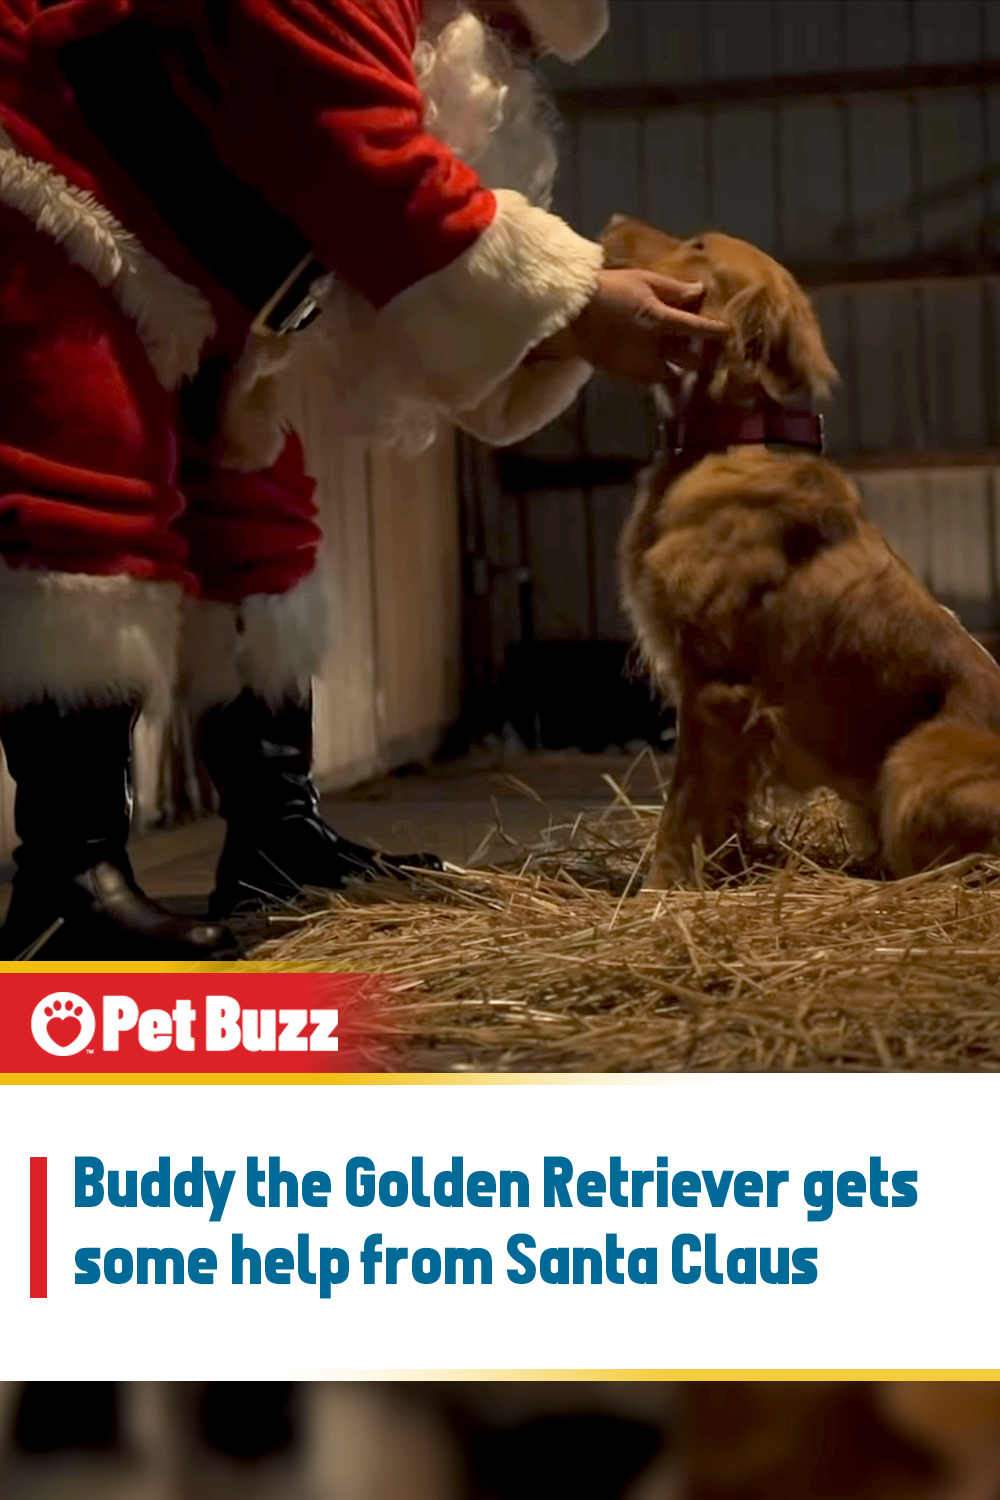 Buddy the Golden Retriever gets some help from Santa Claus